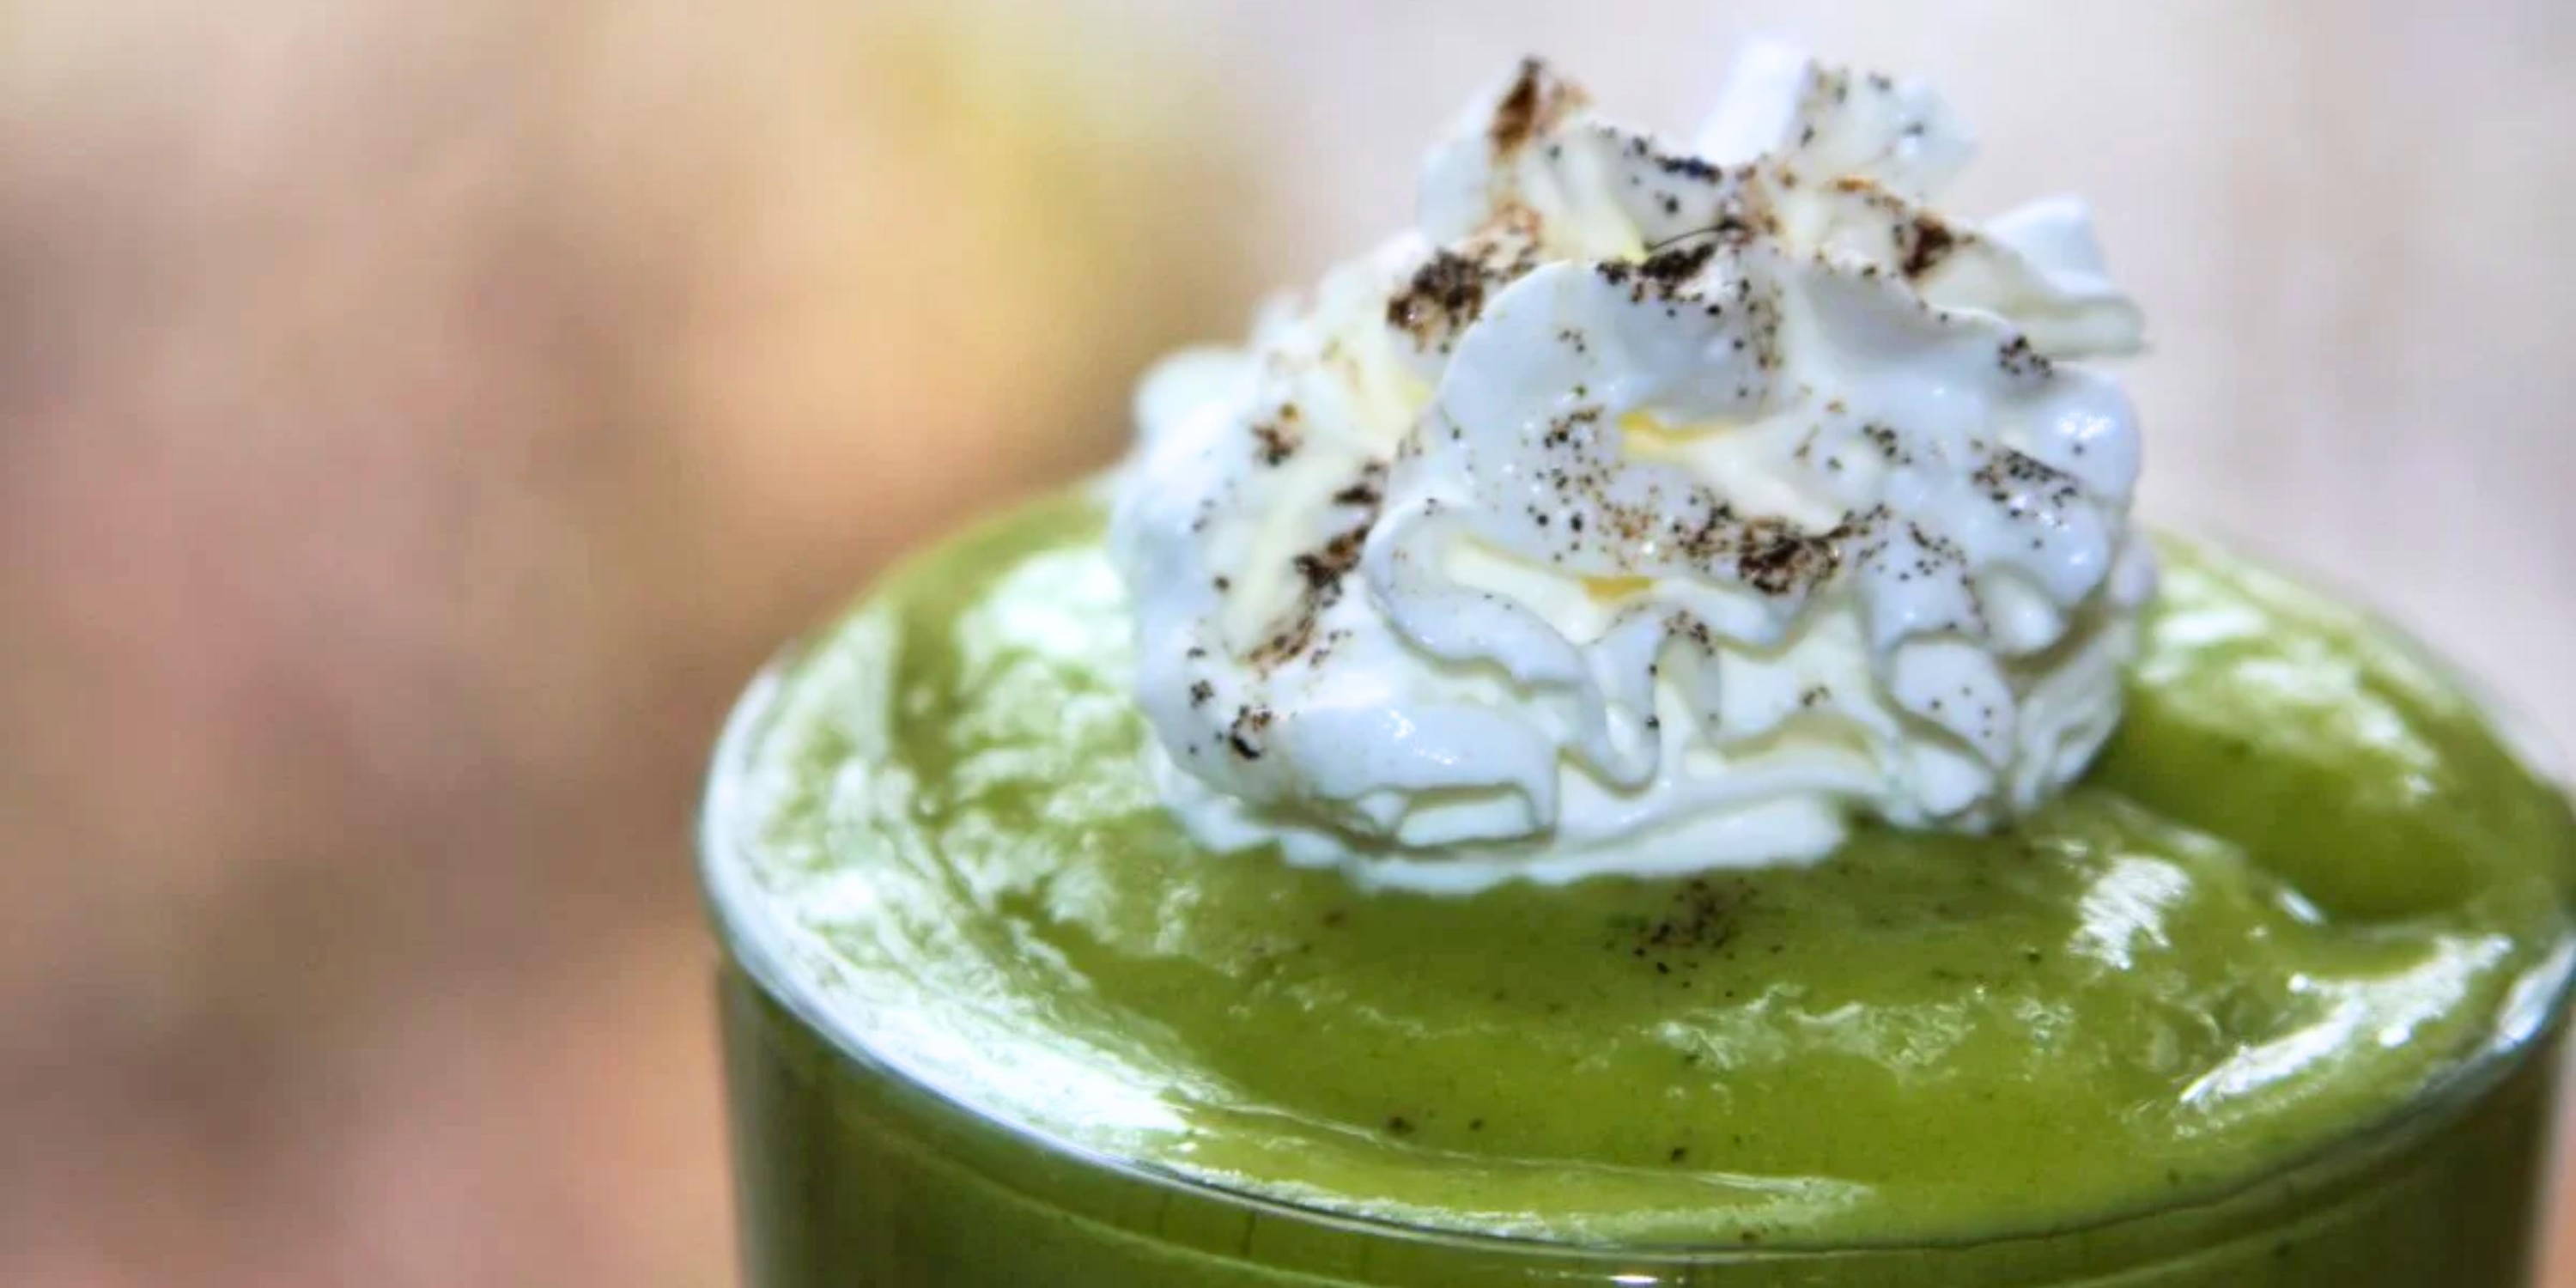 A chaga green smoothie with whipped topping